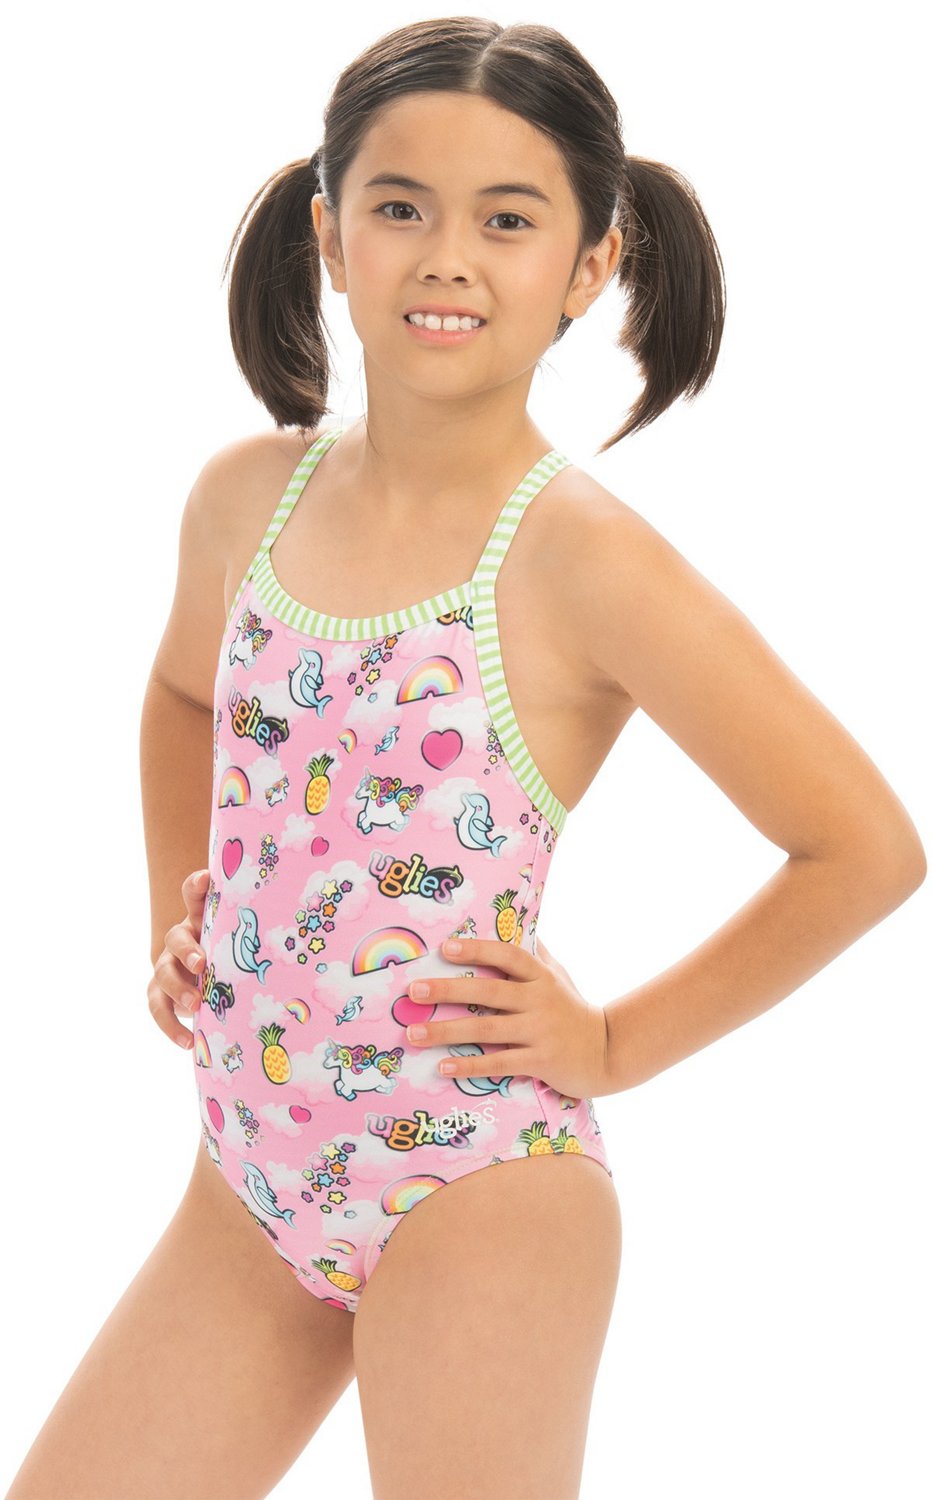 Girls One Piece Swimsuits Girls One Piece Bathing Suits Academy